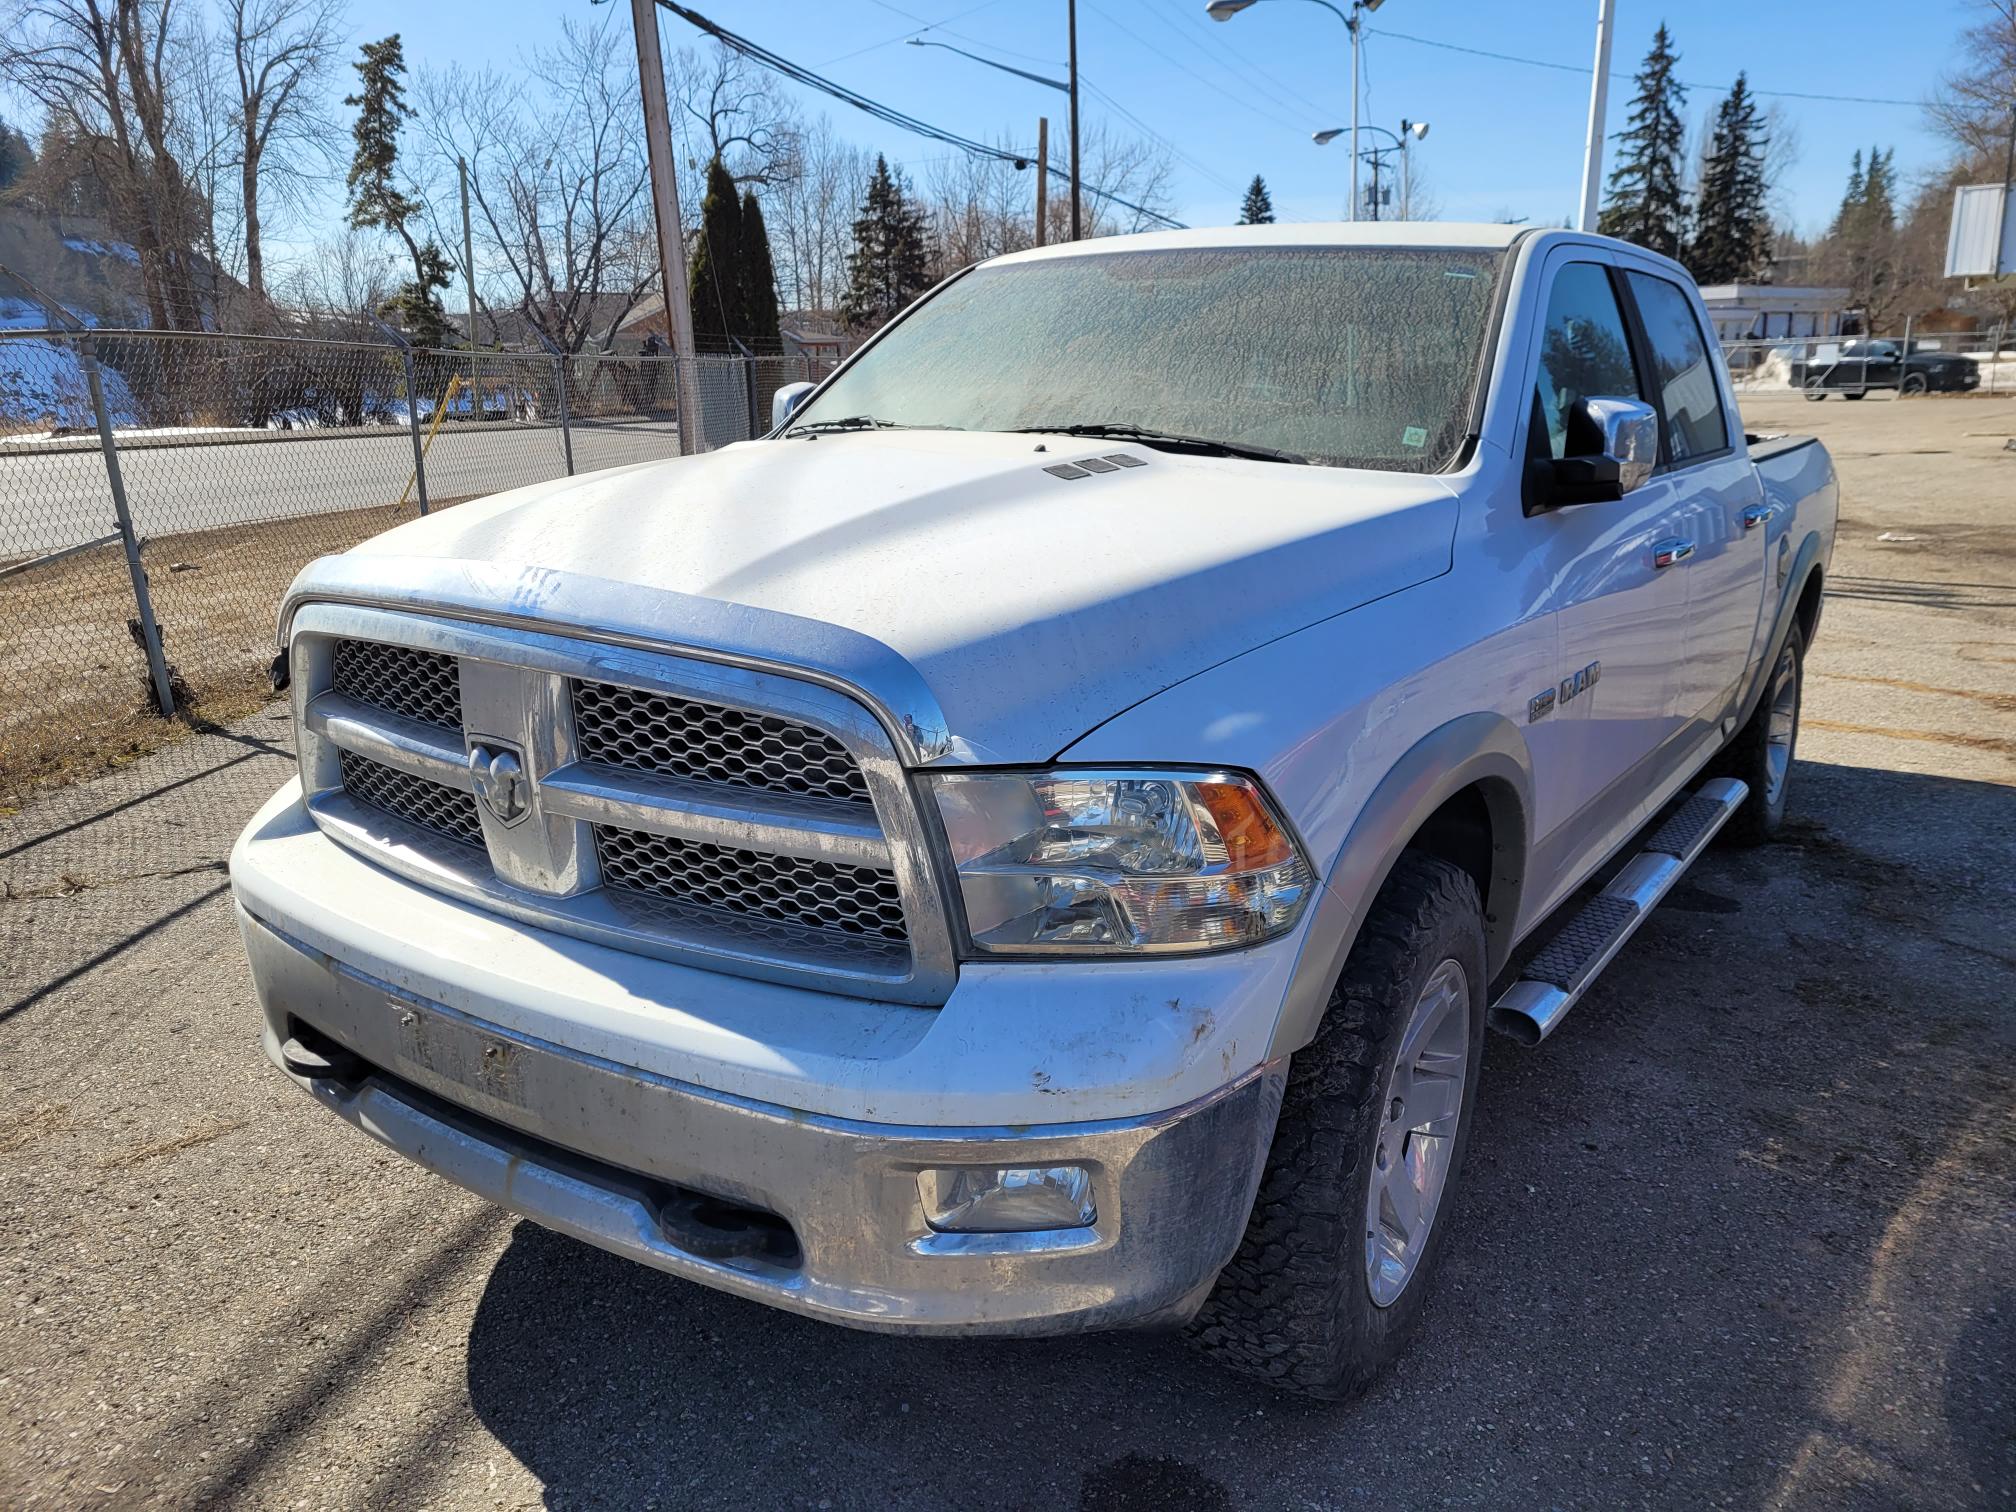 ***Relisted**** CB 2010 Dodge RAM 1500 CB File#: KAM 1286 Located in Prince George